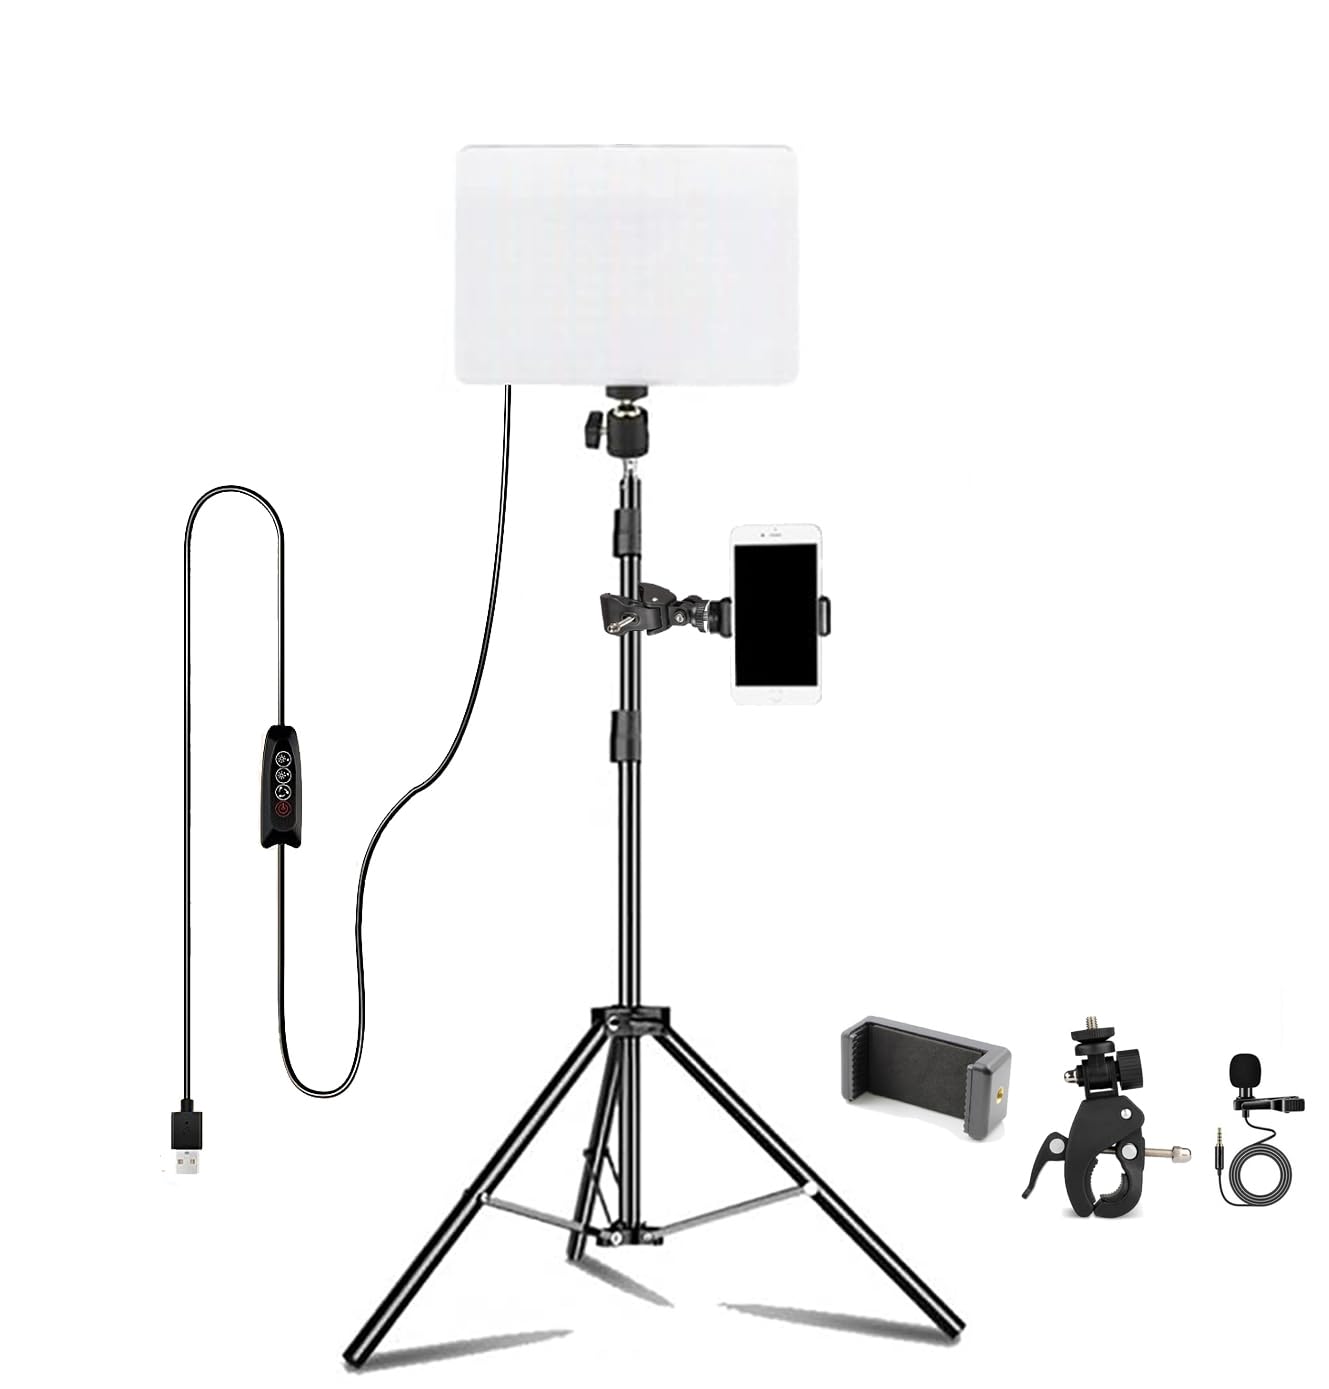 ADZOY Professional Combo of 10 Inch USB Powered LED Panel Light with 7 Feet Adjustable Metal Tripod, Super Clamp and Collar Lapel Microphone